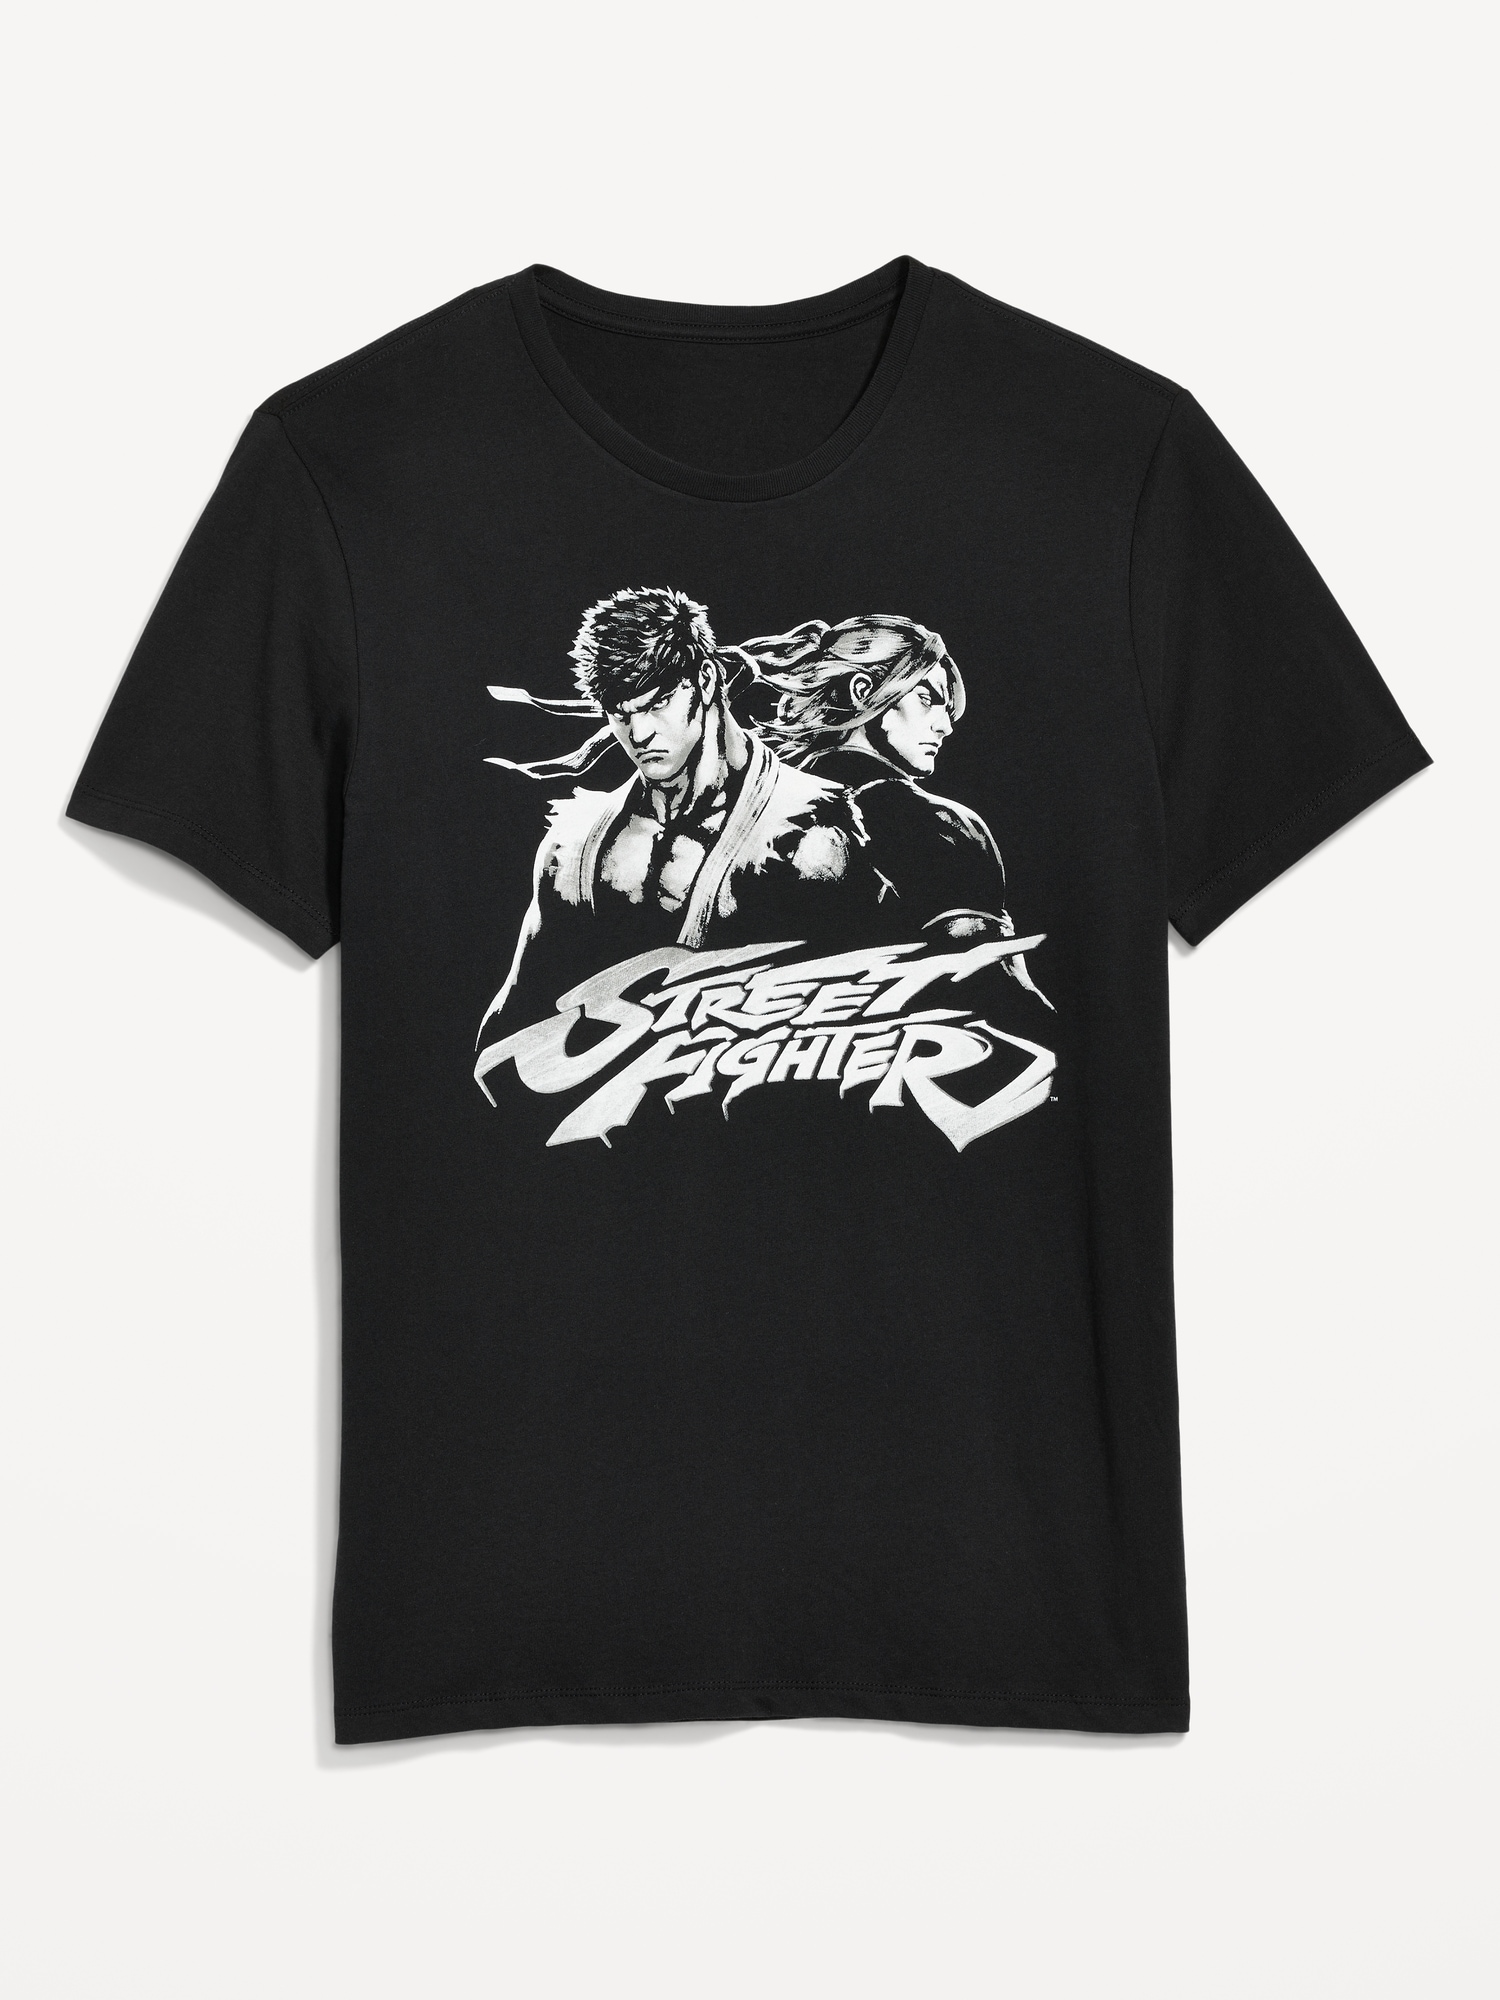 Street Fighter™ Gender-Neutral T-Shirt for Adults